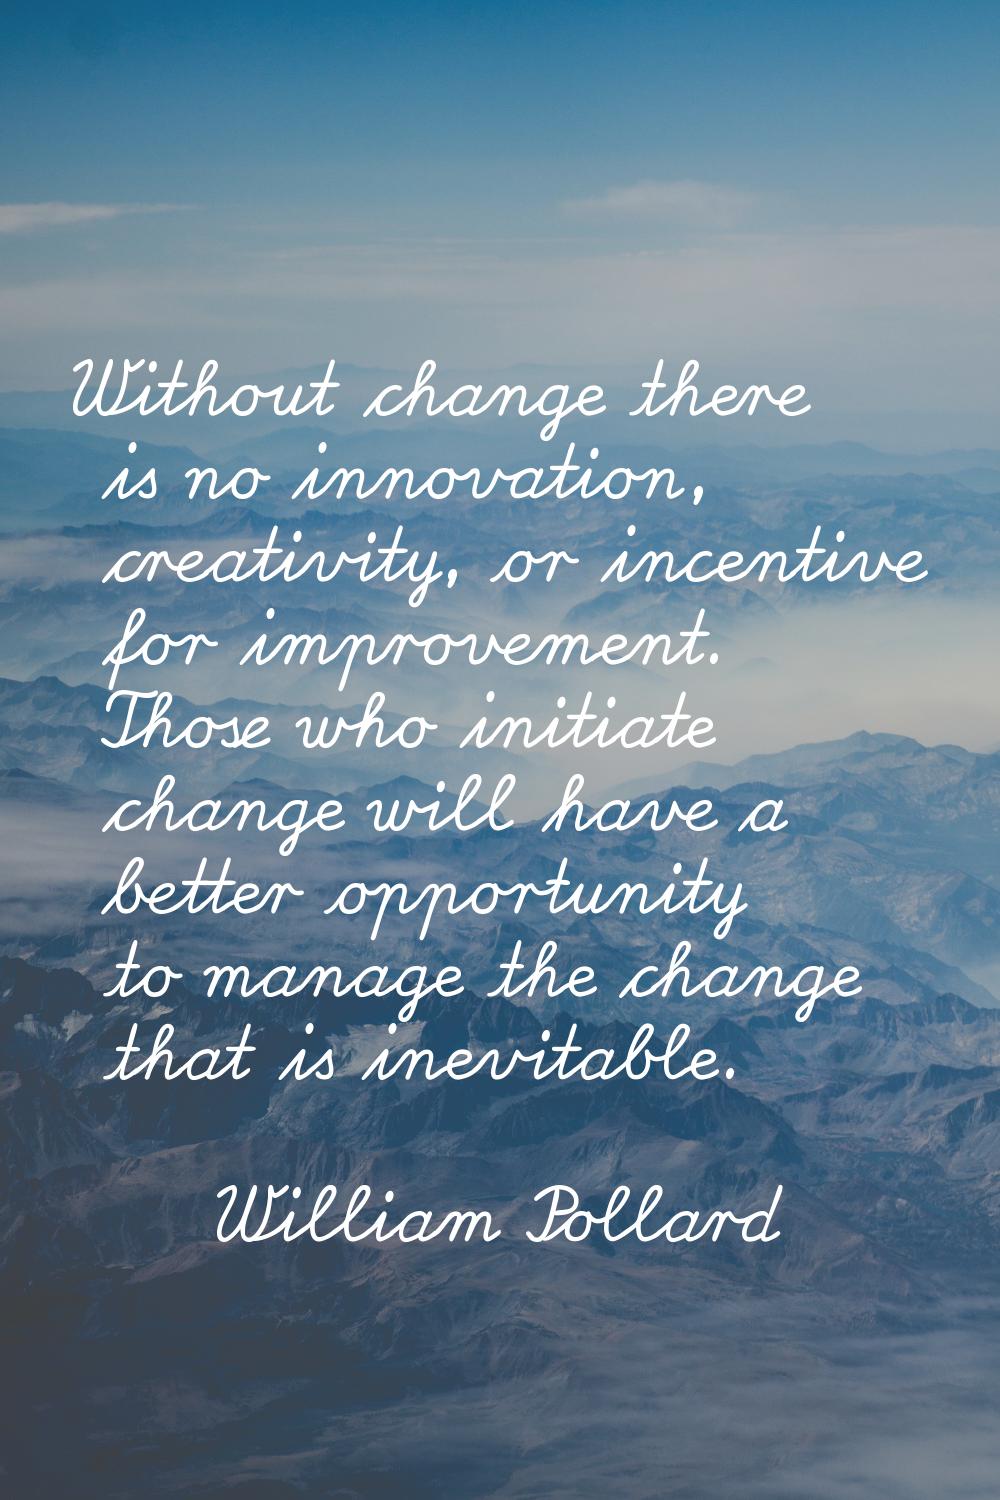 Without change there is no innovation, creativity, or incentive for improvement. Those who initiate